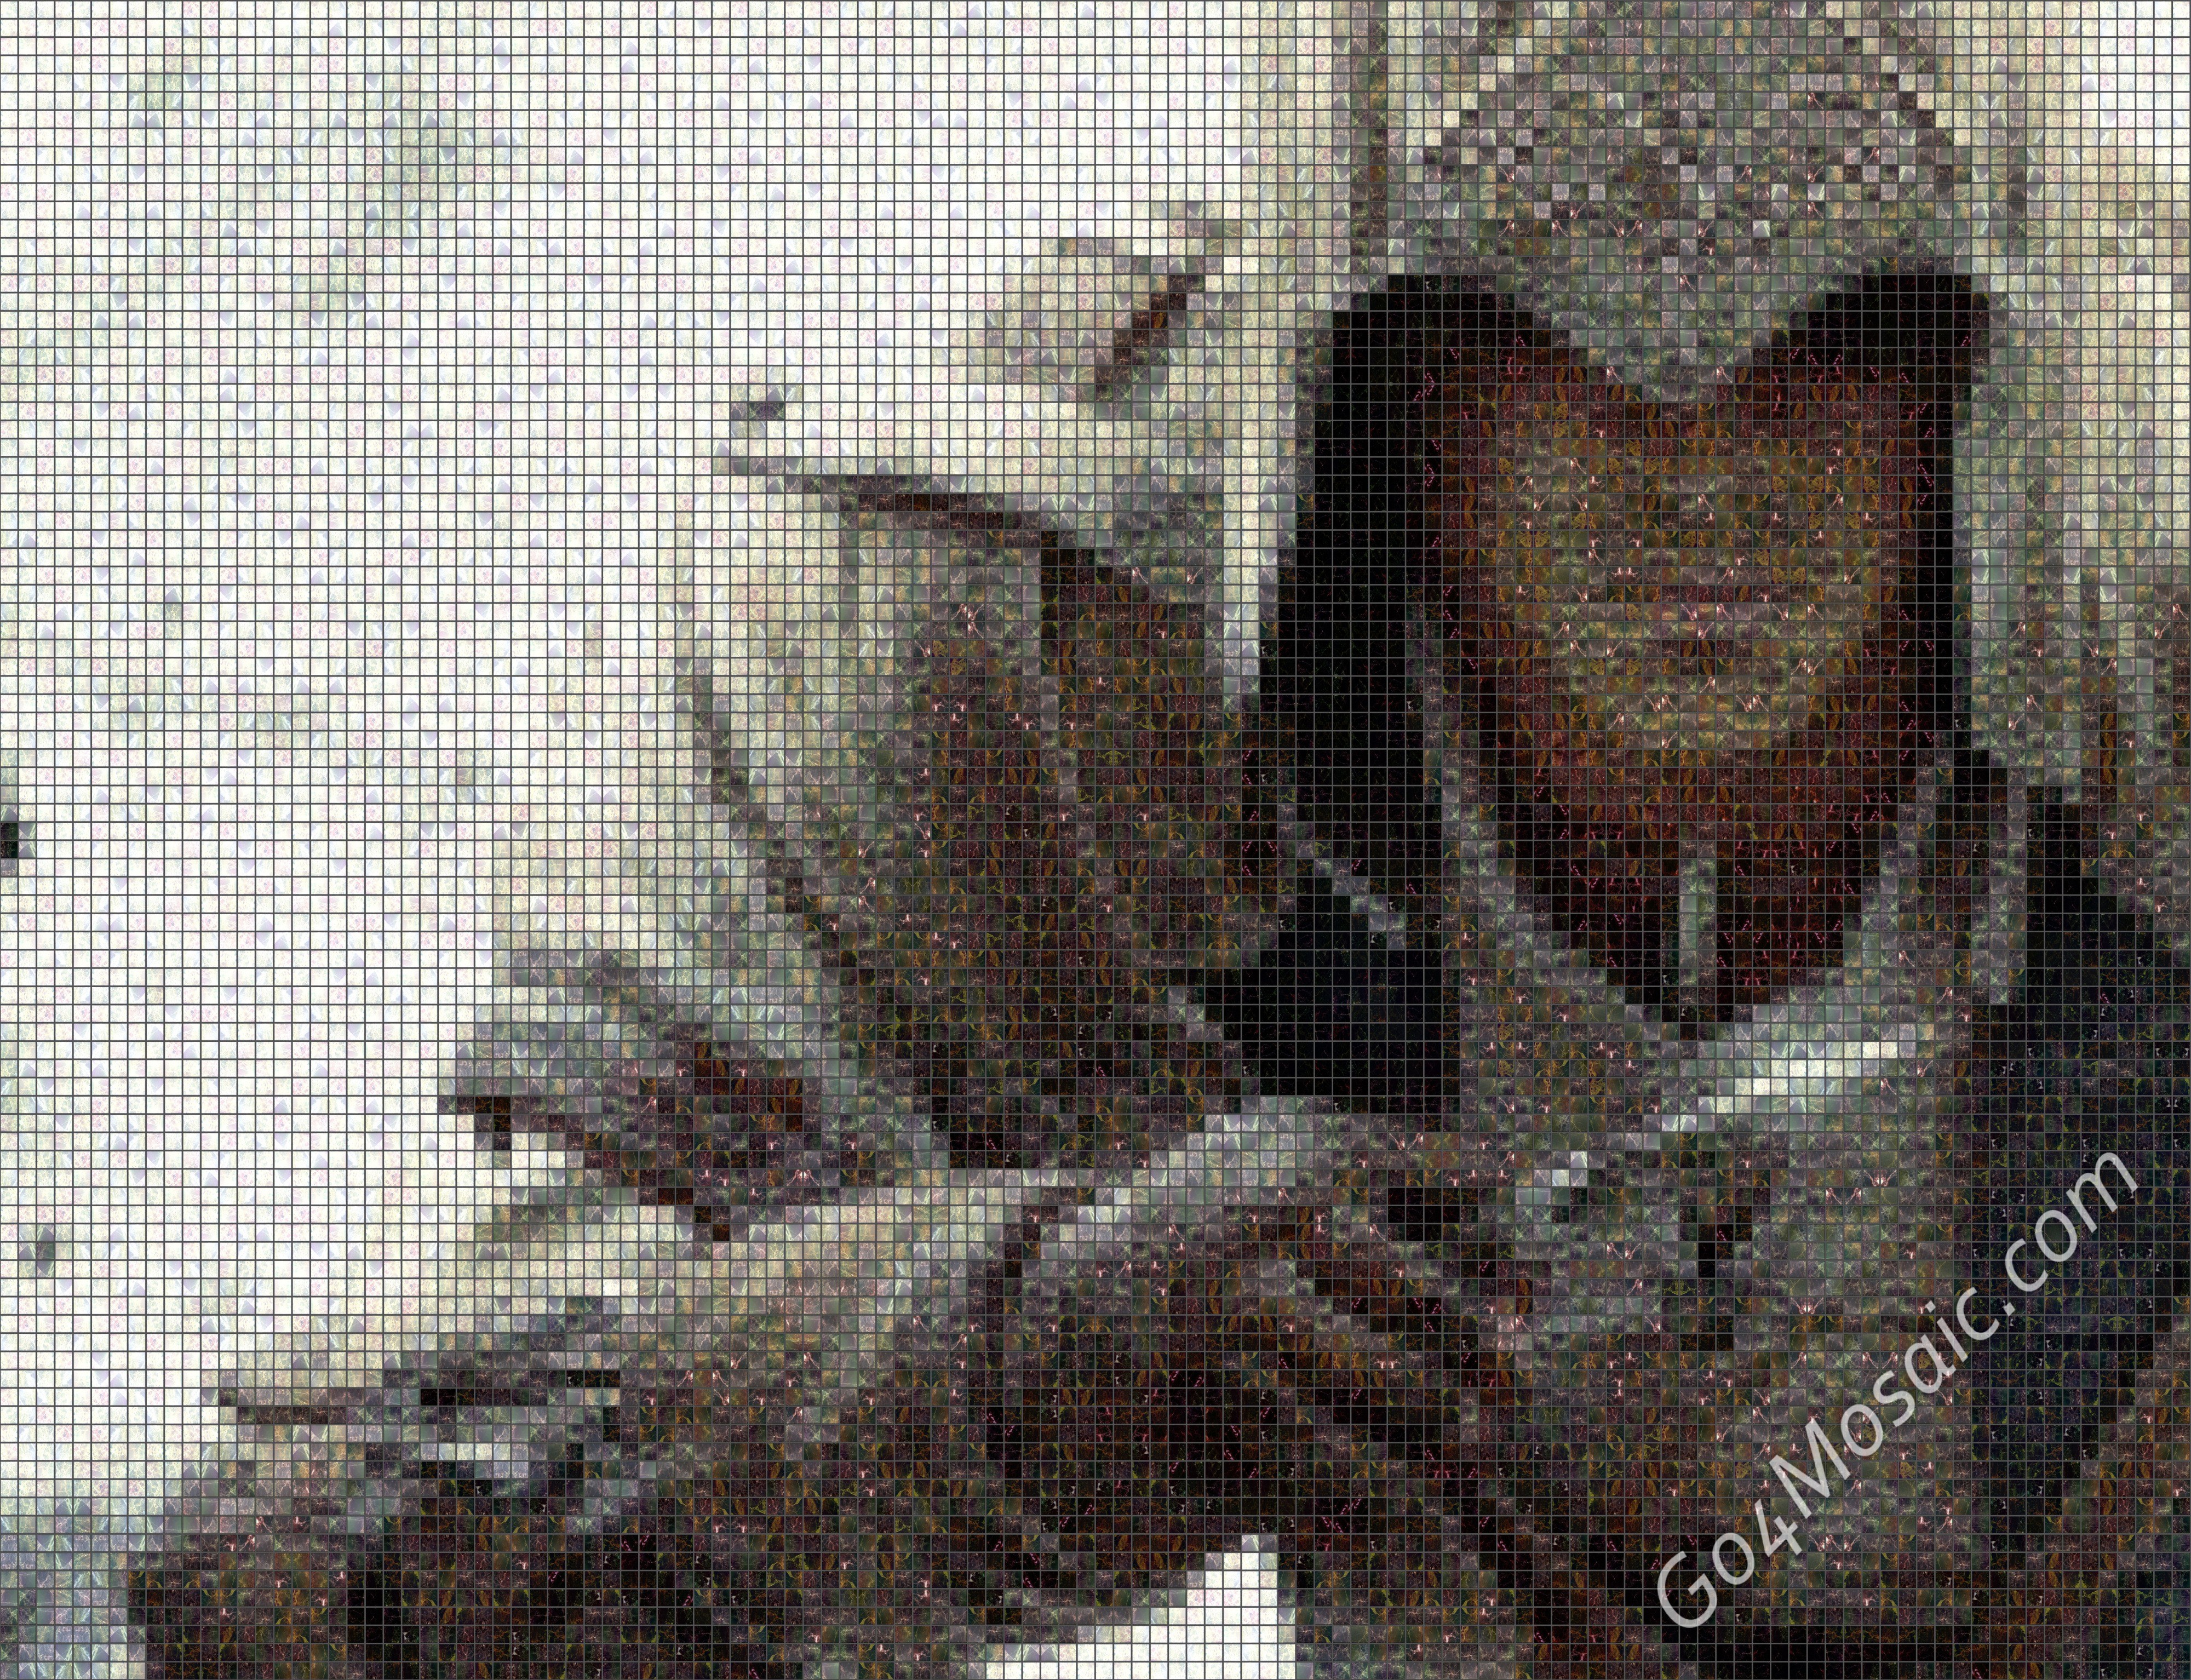 Assassin’s Creed 3 - Connor mosaic from Marble